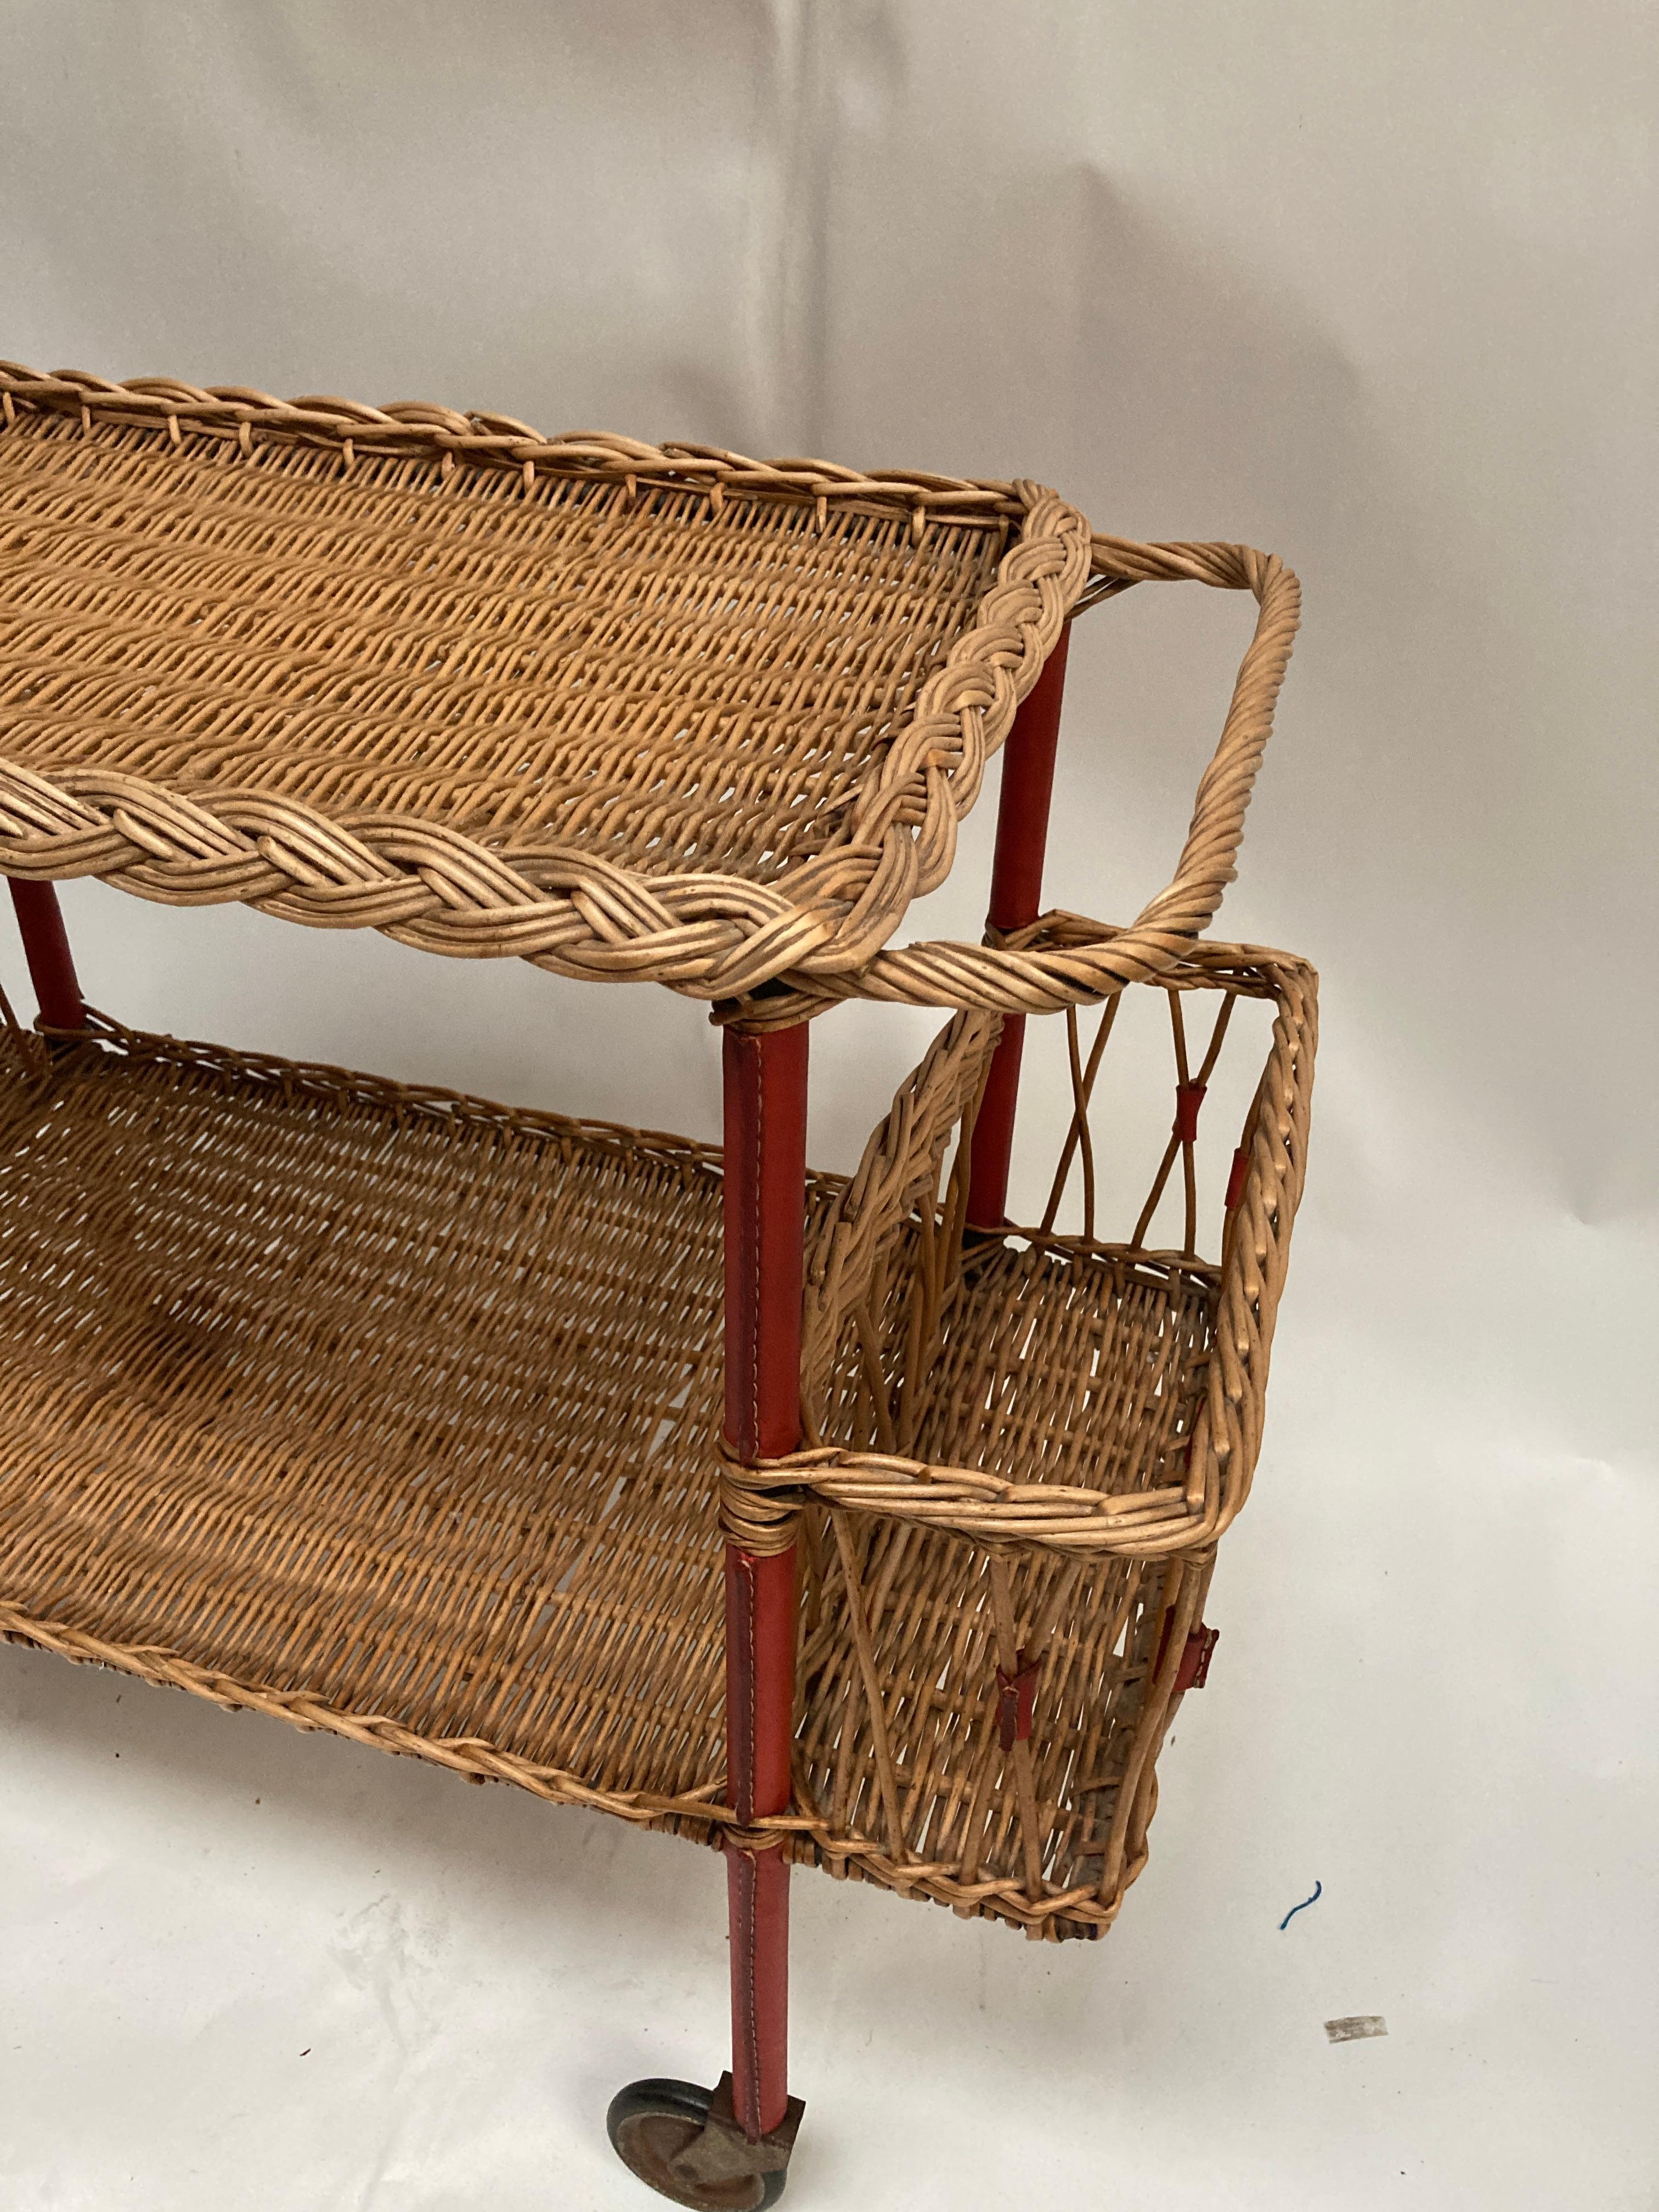 1950's Stitched leather and rattan bar cart by Jacques Adnet For Sale 3